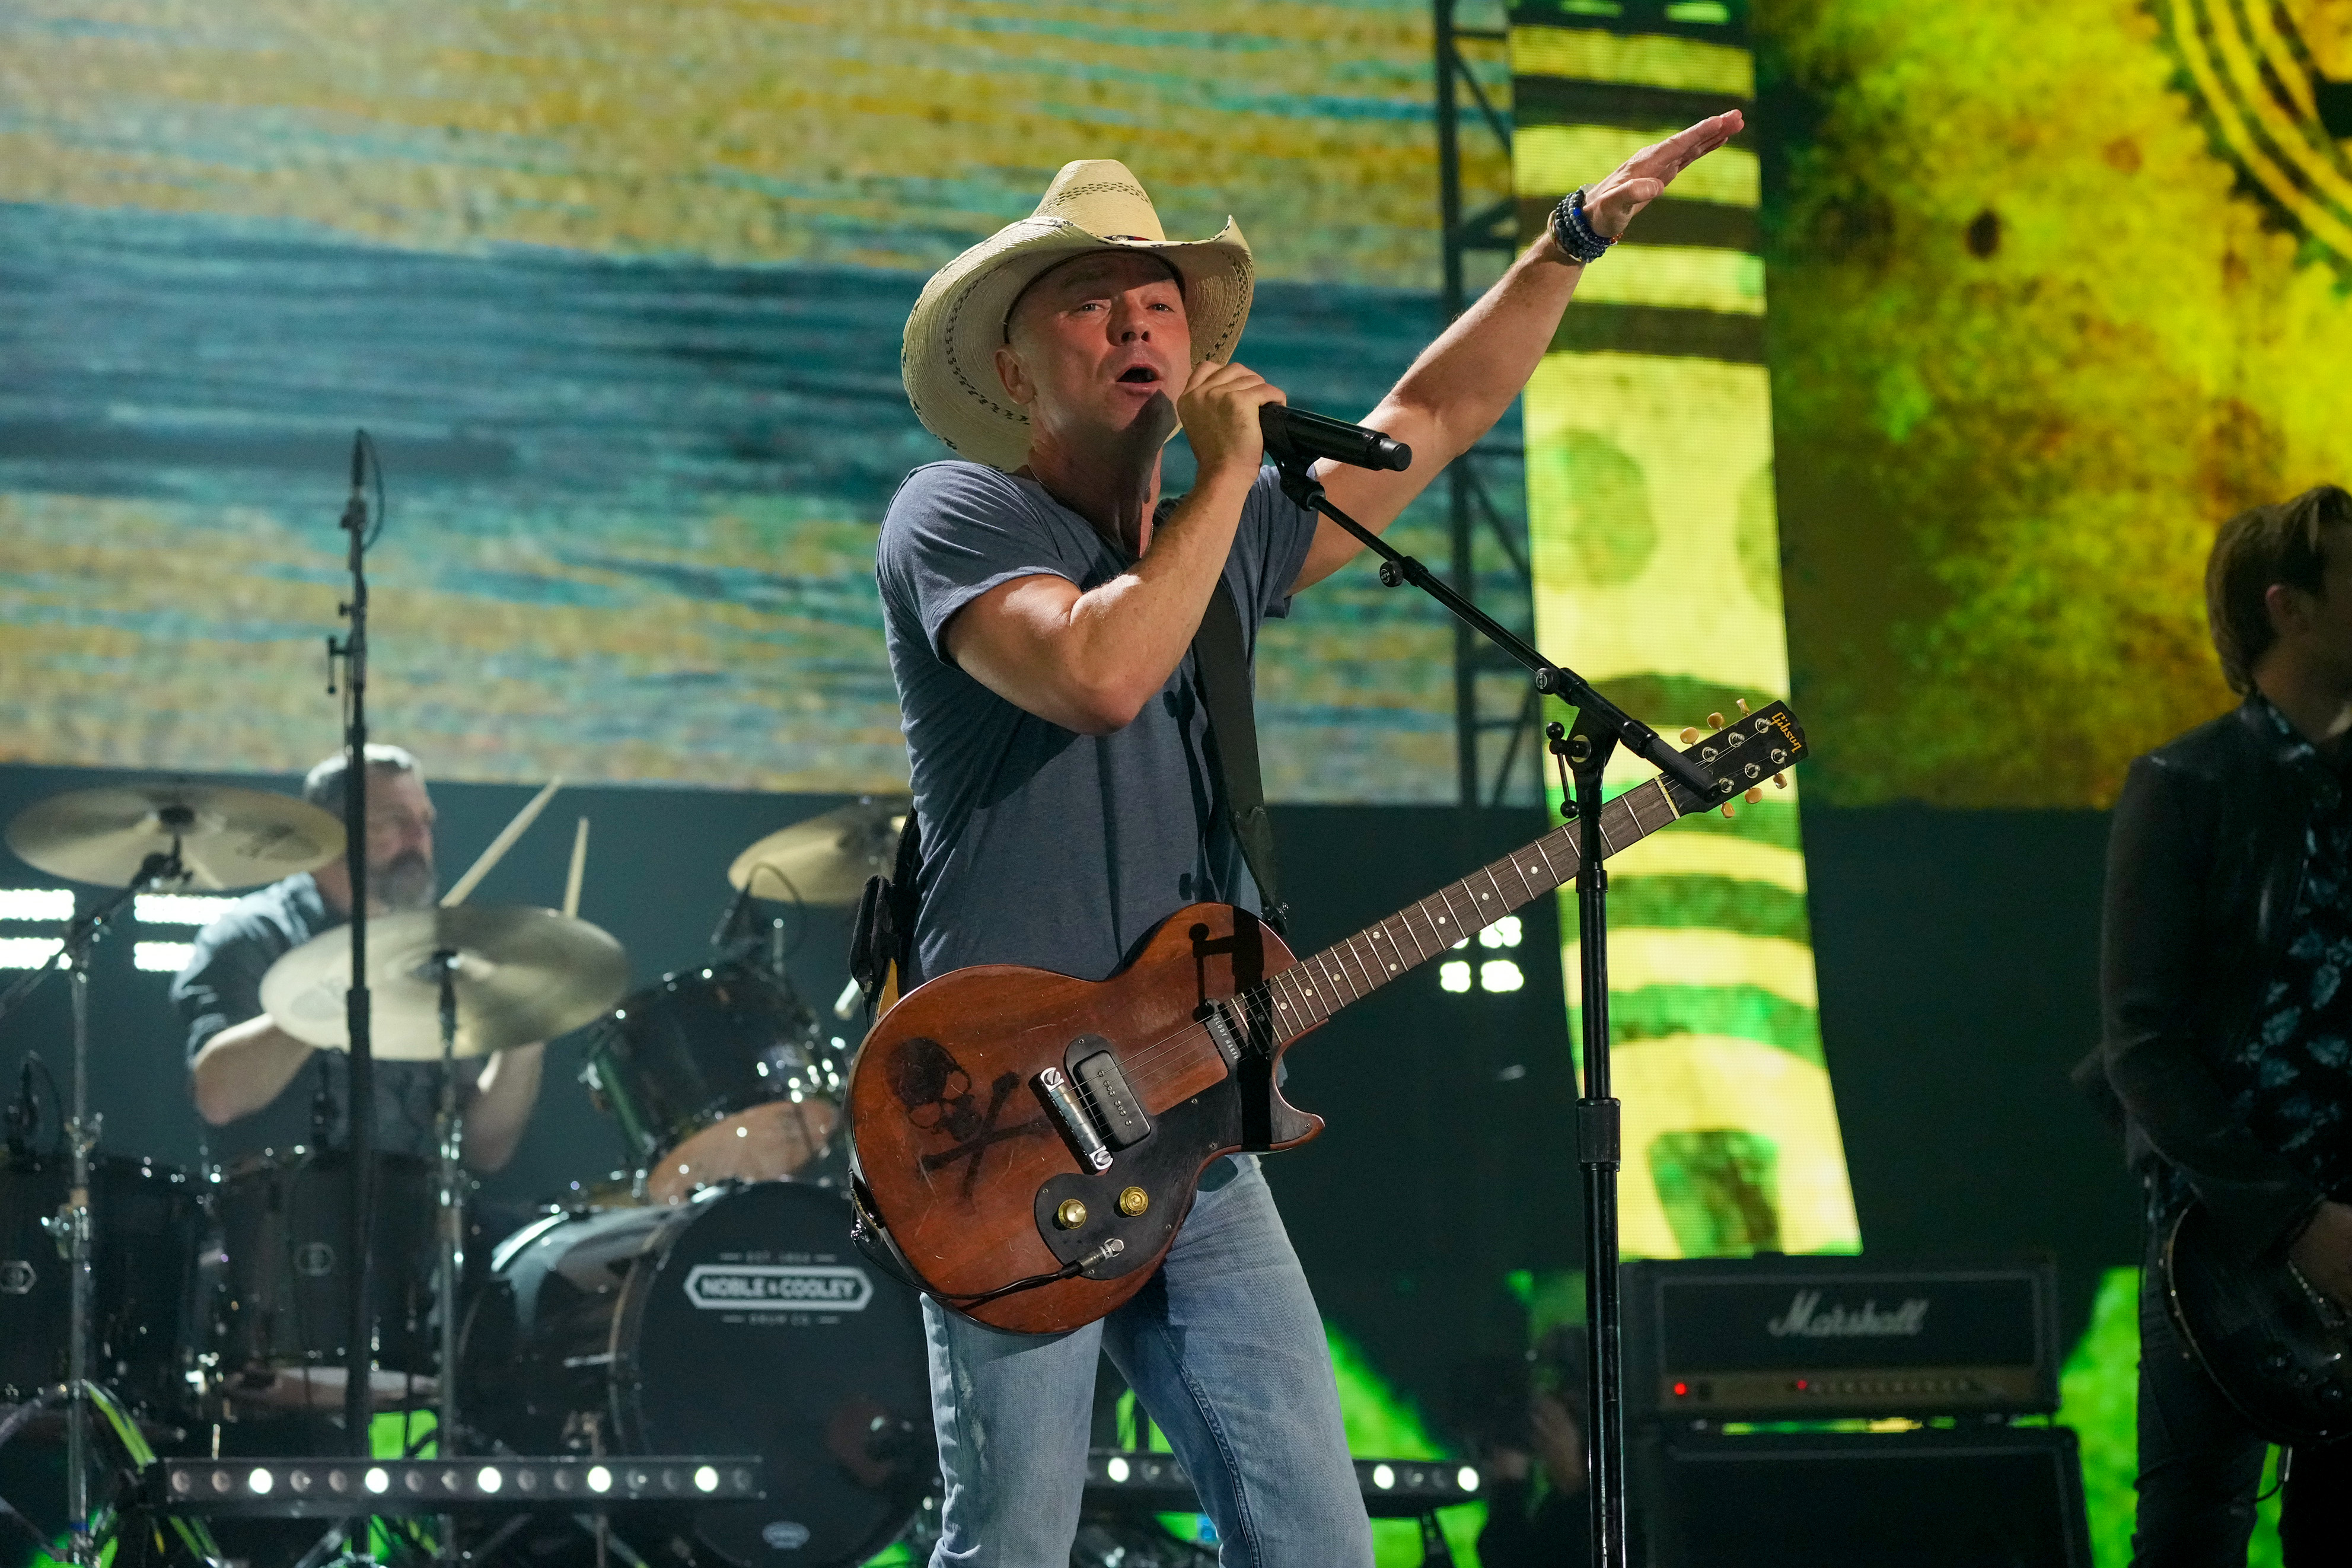 Kenny Chesney performs at the 2022 CMT Music Awards at Nashville Municipal Auditorium